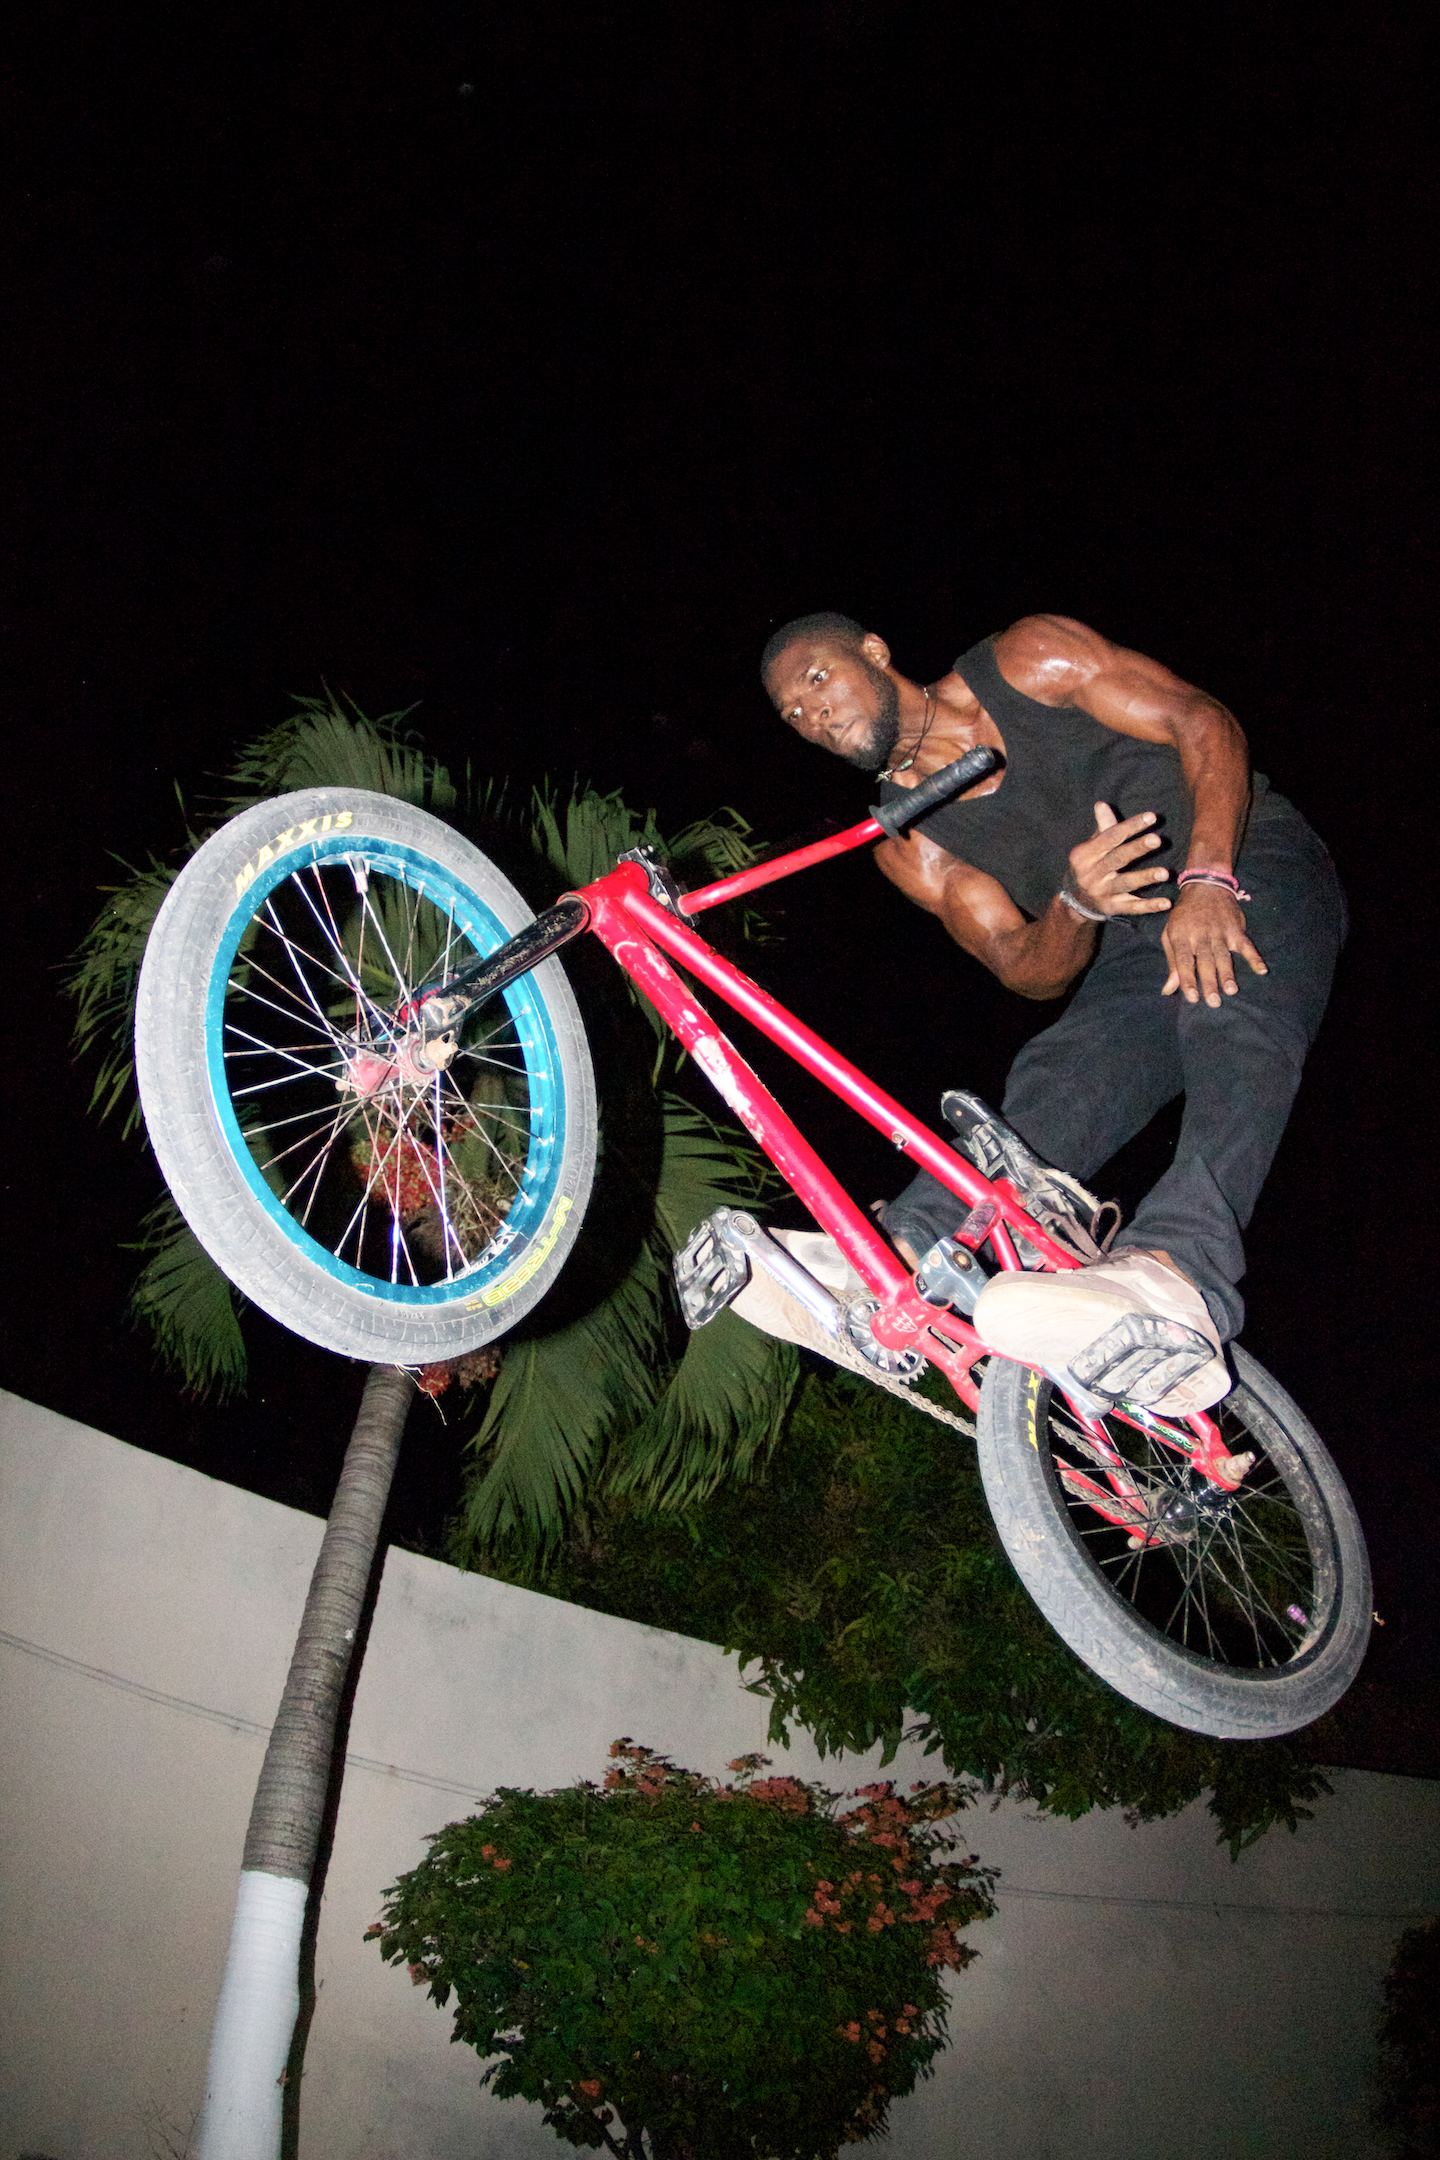 A man in a black vest flies through the air on his BMX bike without holding the handlebars.